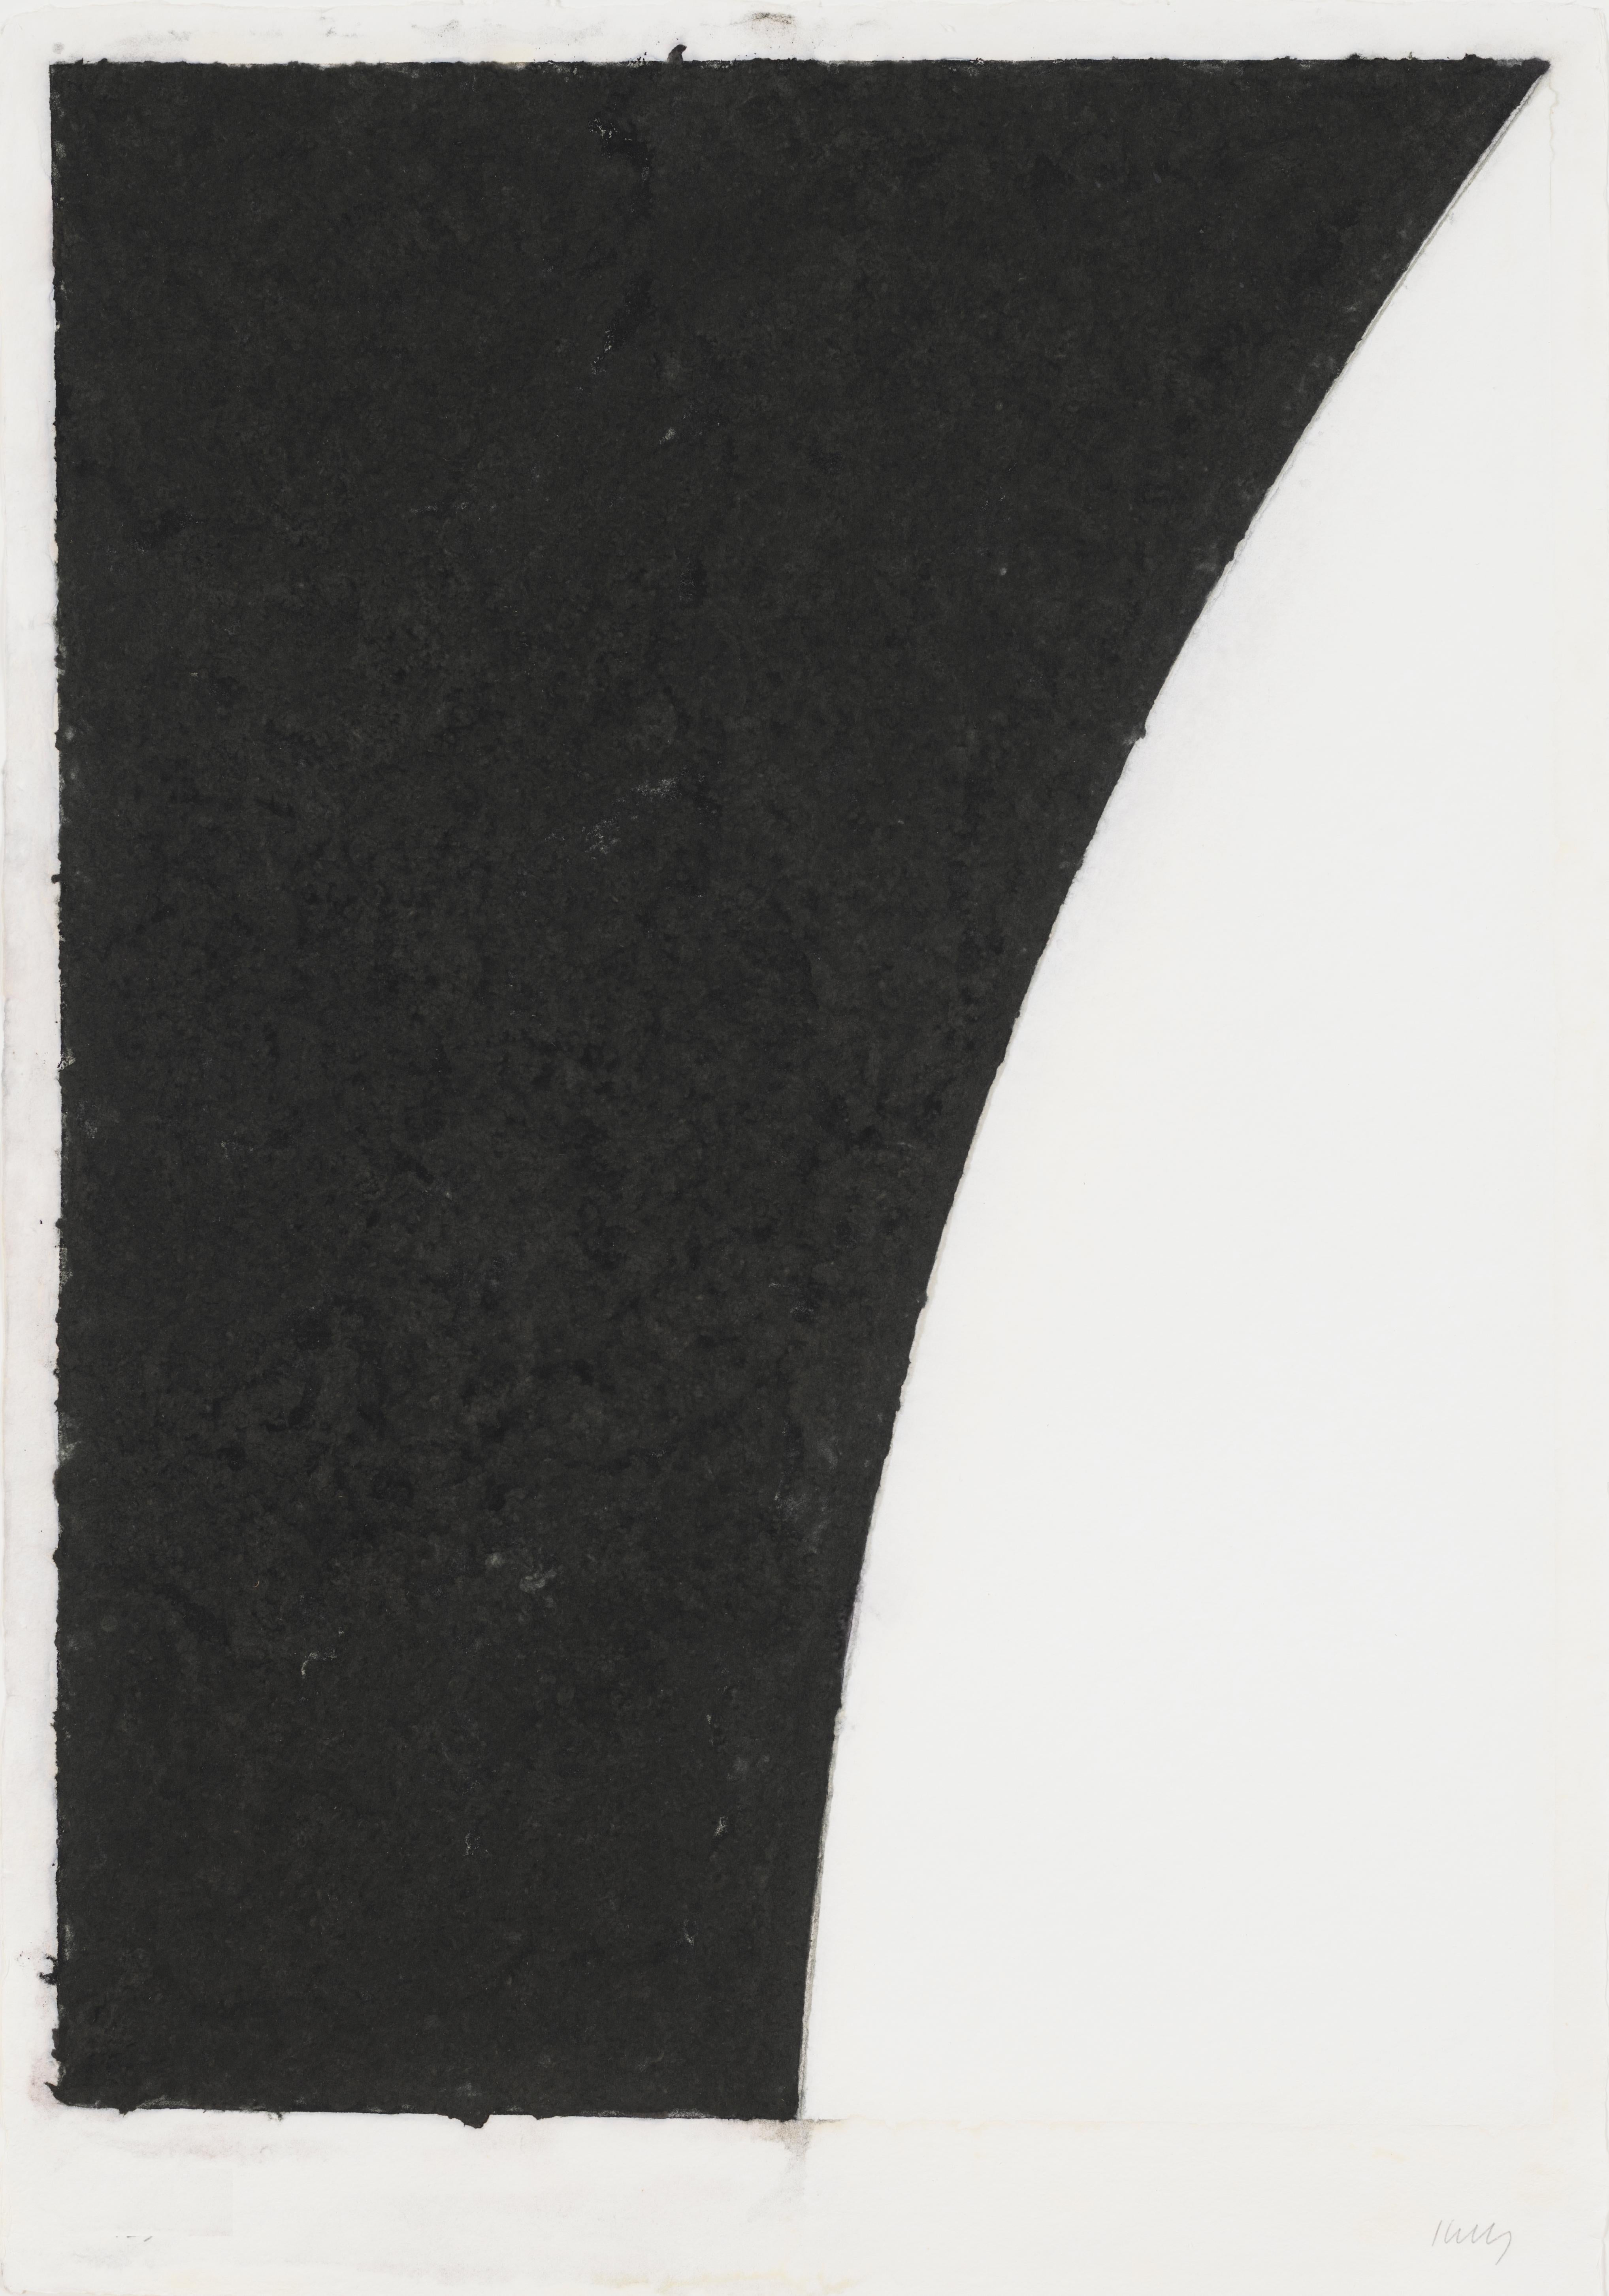 Ellsworth Kelly Abstract Print - Colored Paper Image VI (White with Black Curve II)